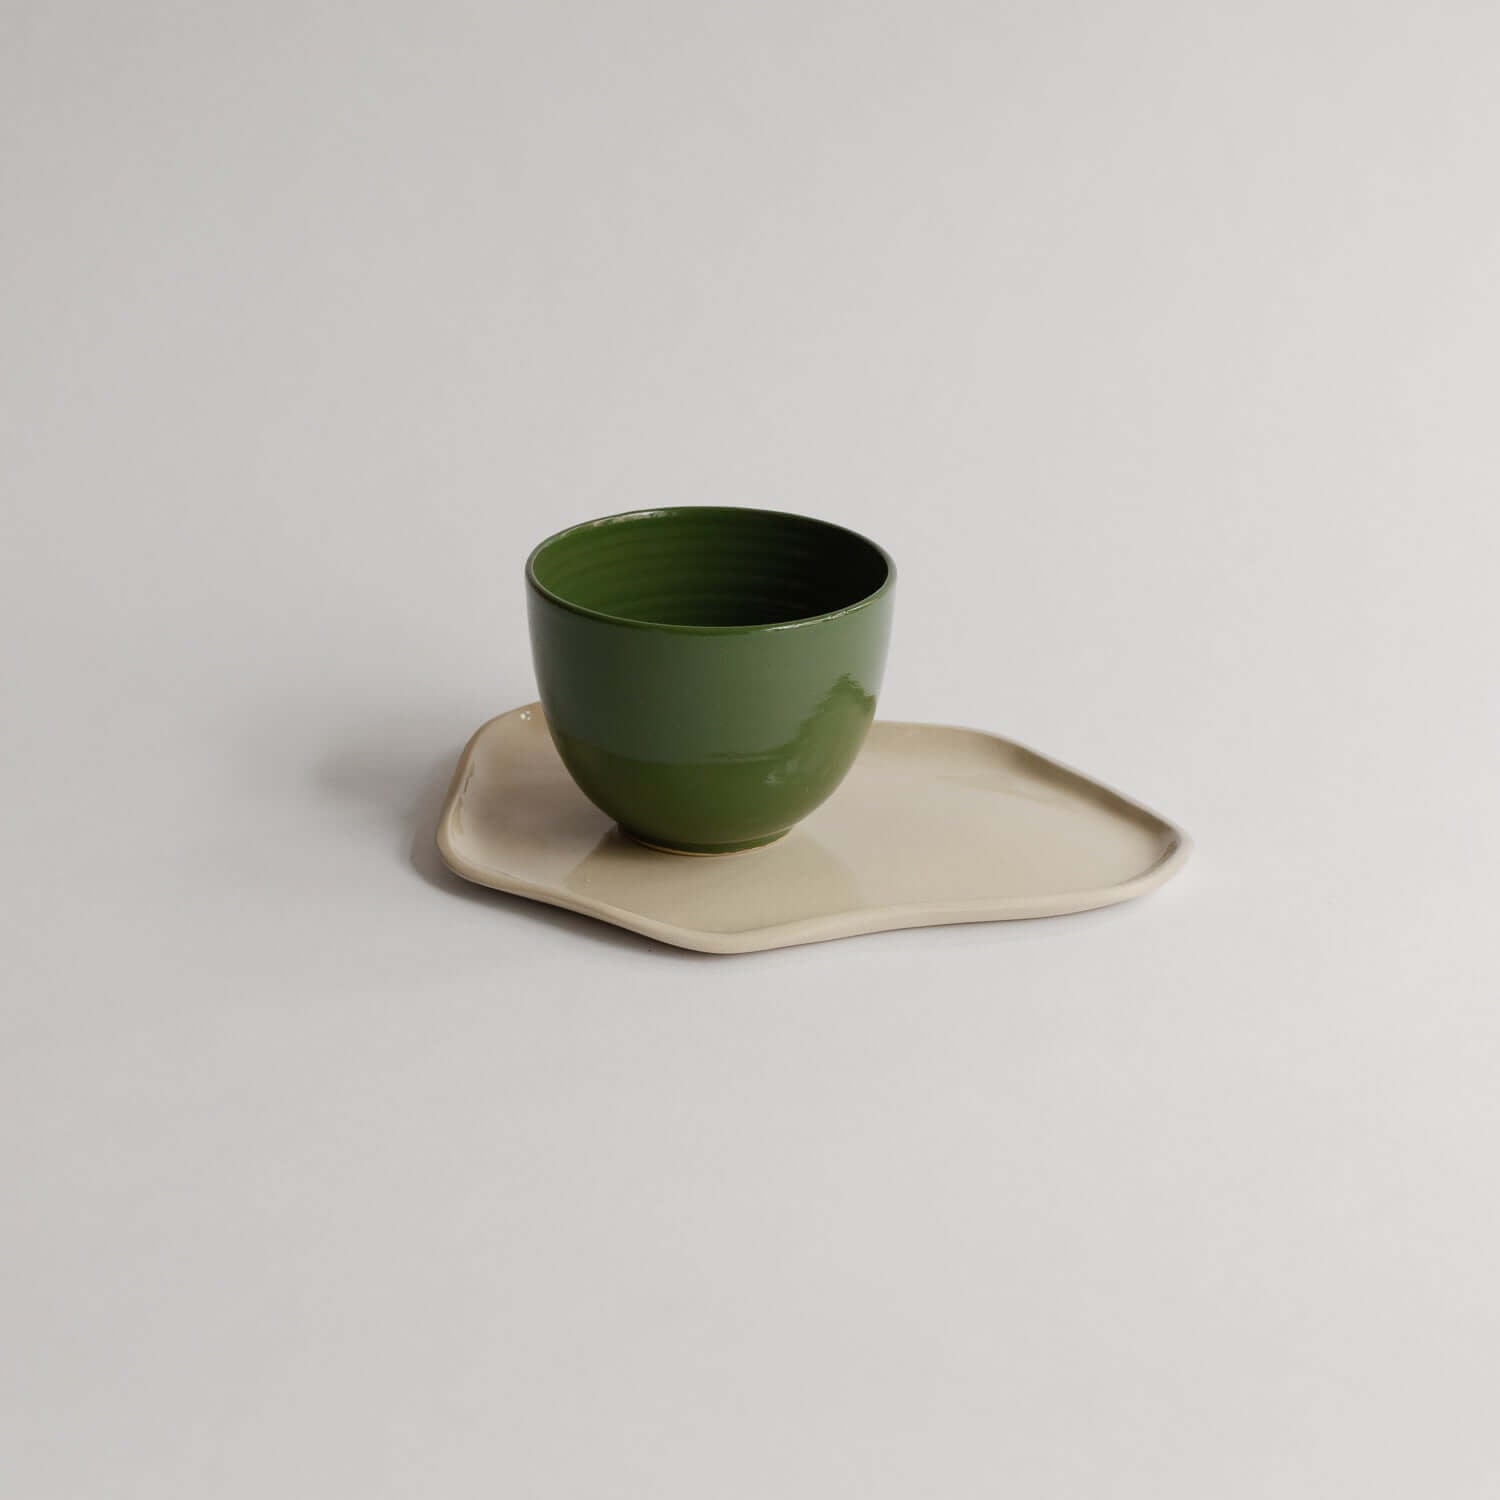 Unique Serving Cup Set with a 200ml Yun Green Coffee Cup & Creme Tray. Handcrafted grey stoneware with food-safe glazes. Perfect for gifting and for yourself. von viola beuscher ceramics